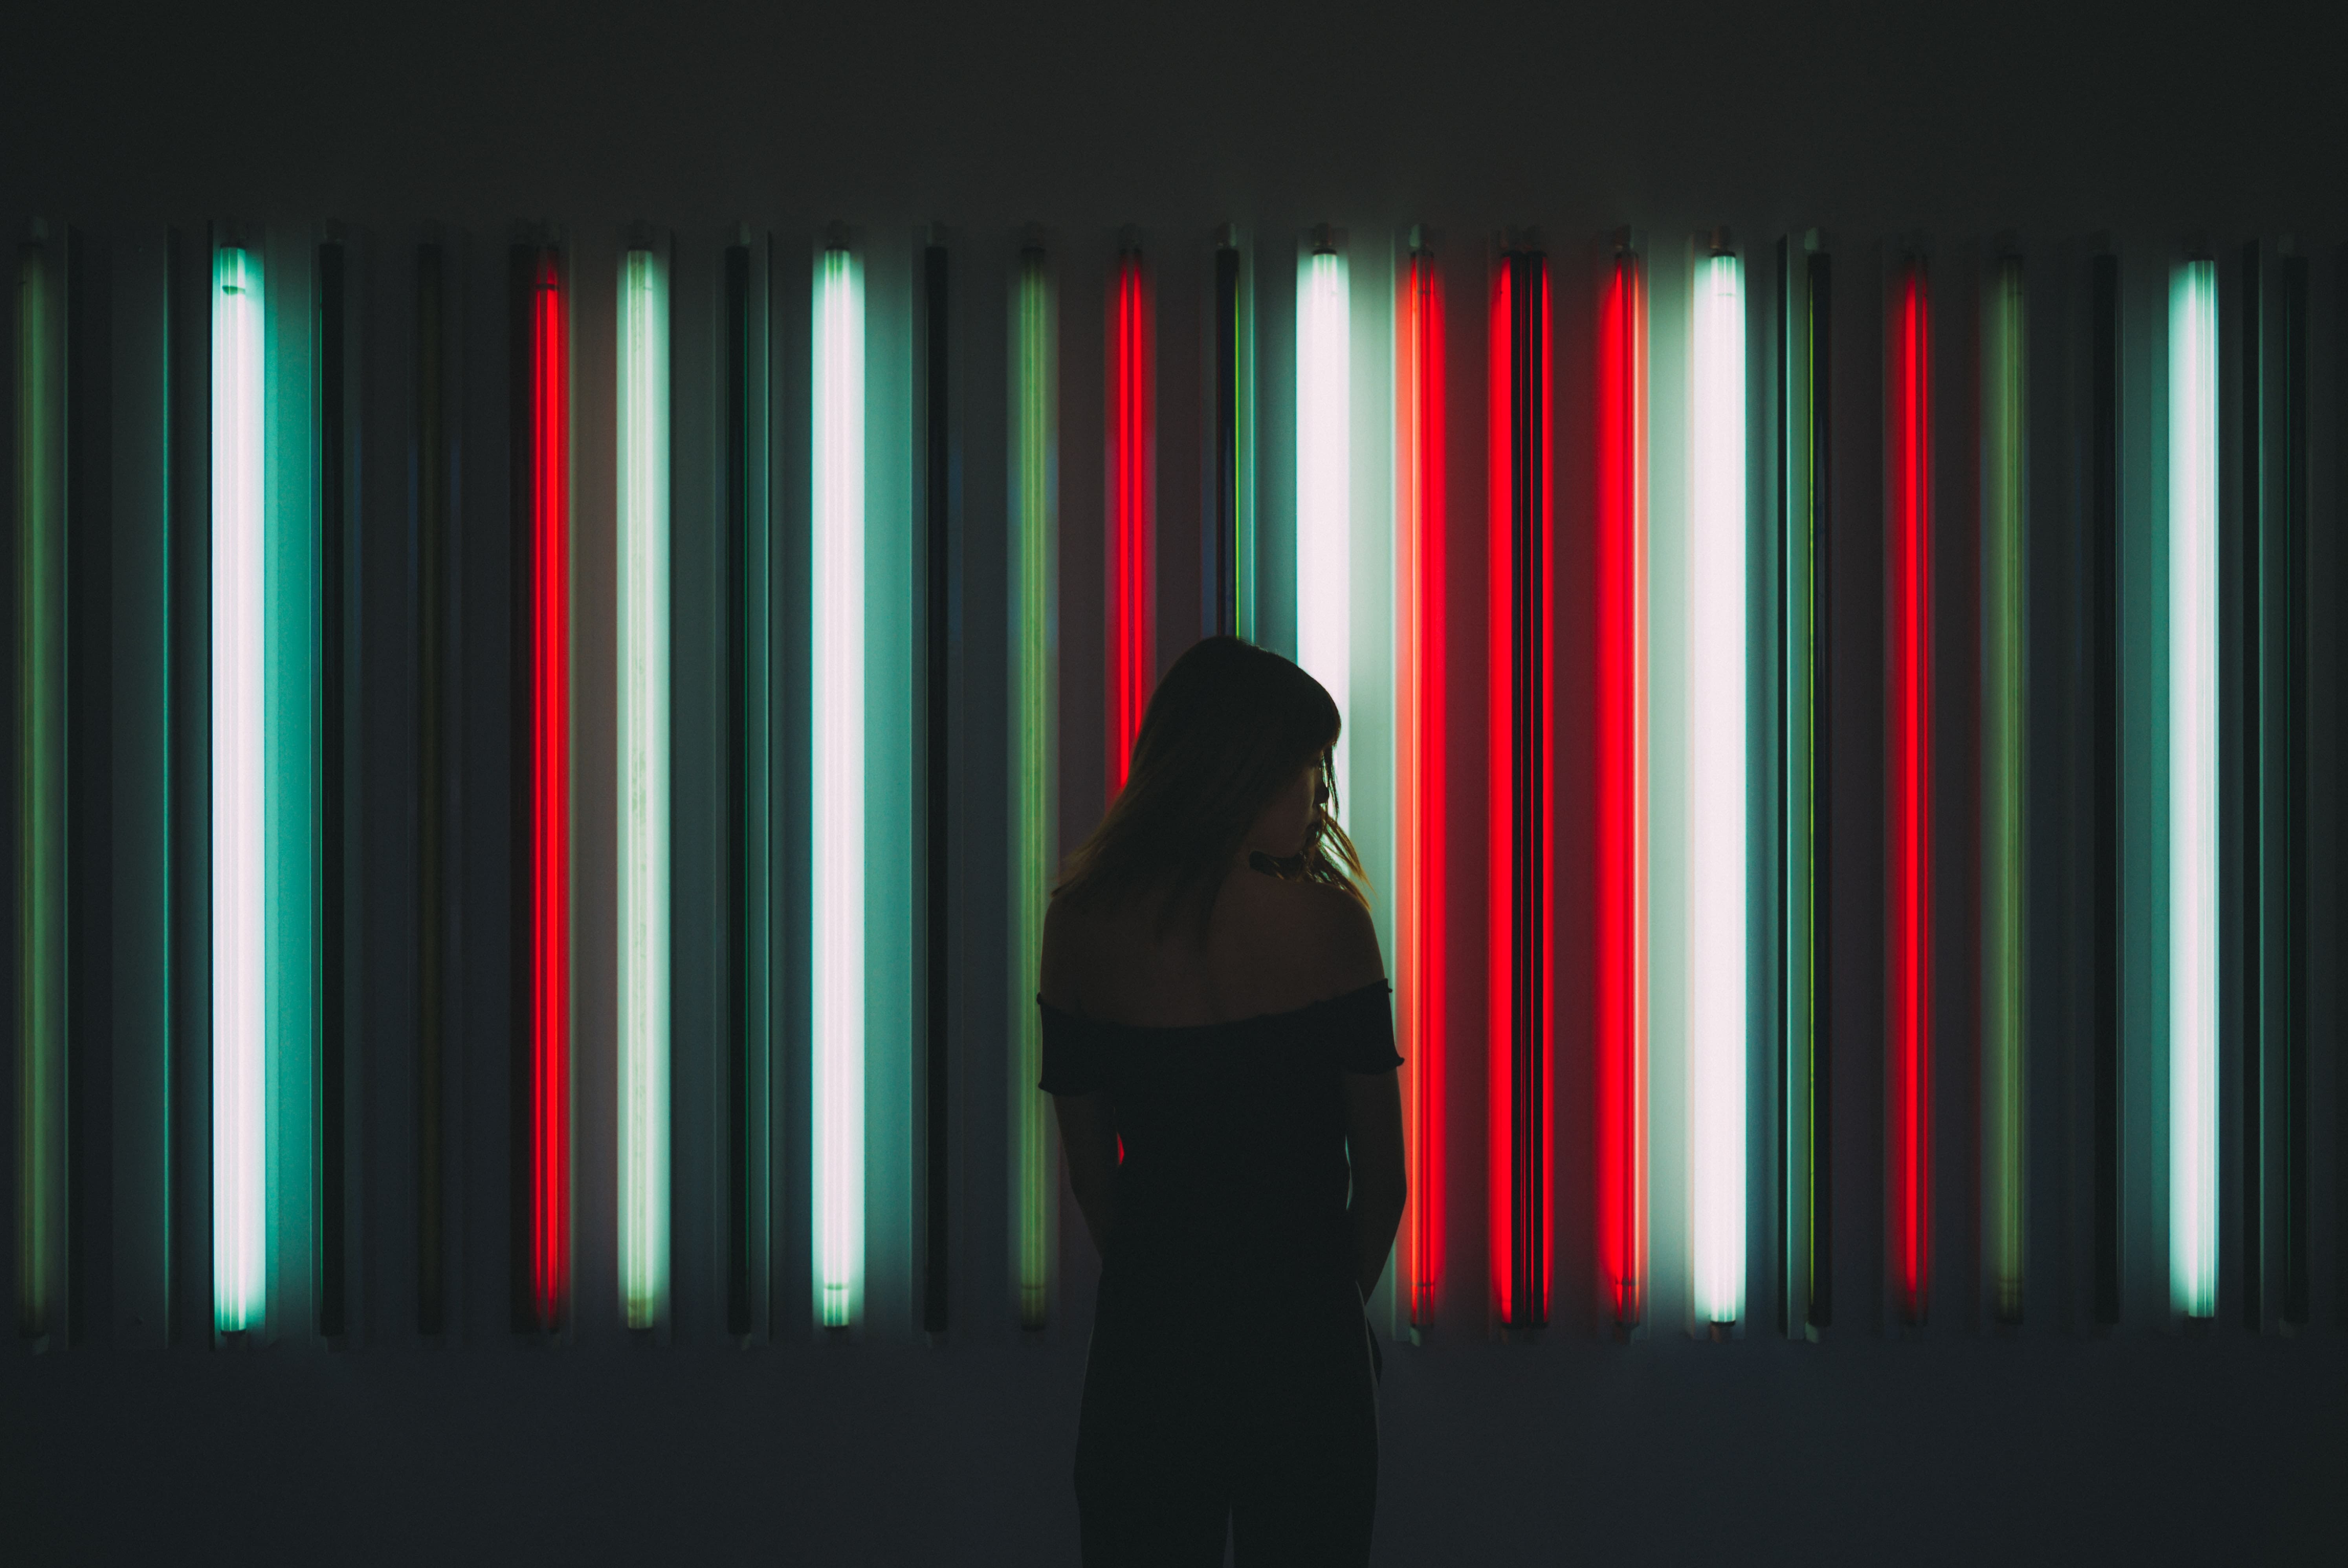 A woman's silhouette in front of a wall of white and red fluorescent light bulbs.